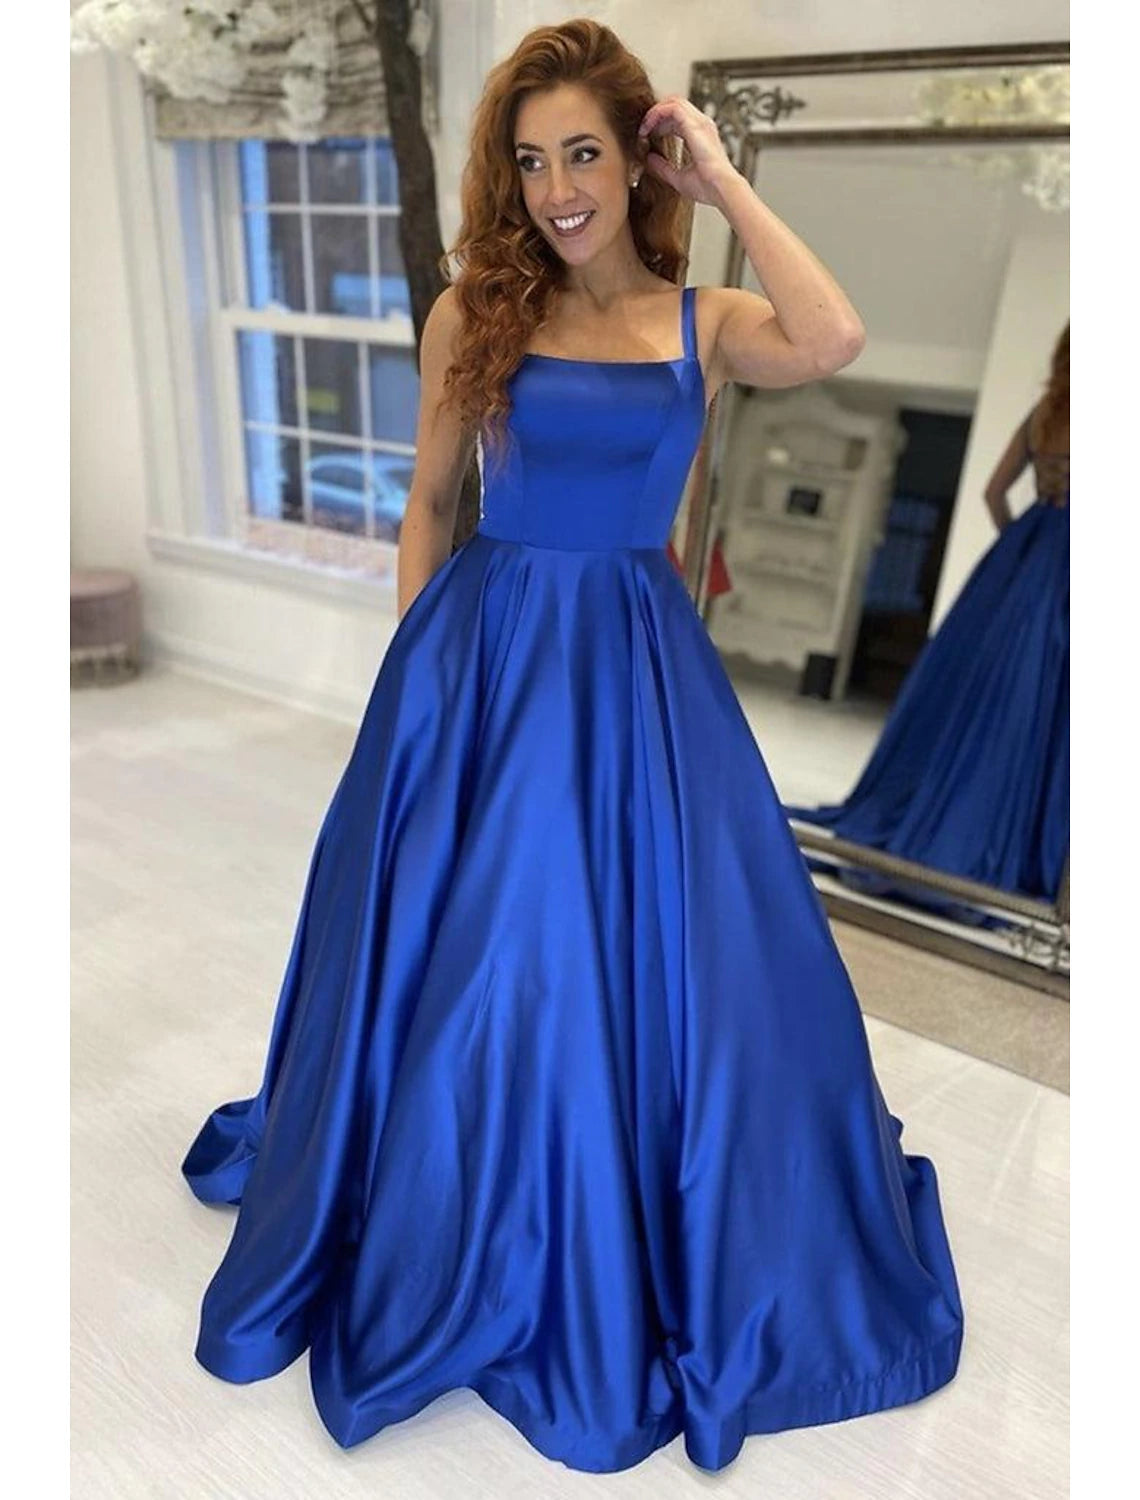 Wholesa A-Line Prom Dresses Princess Dress Formal Prom Sweep / Brush Train Sleeveless Strapless Satin Backless with Pleats